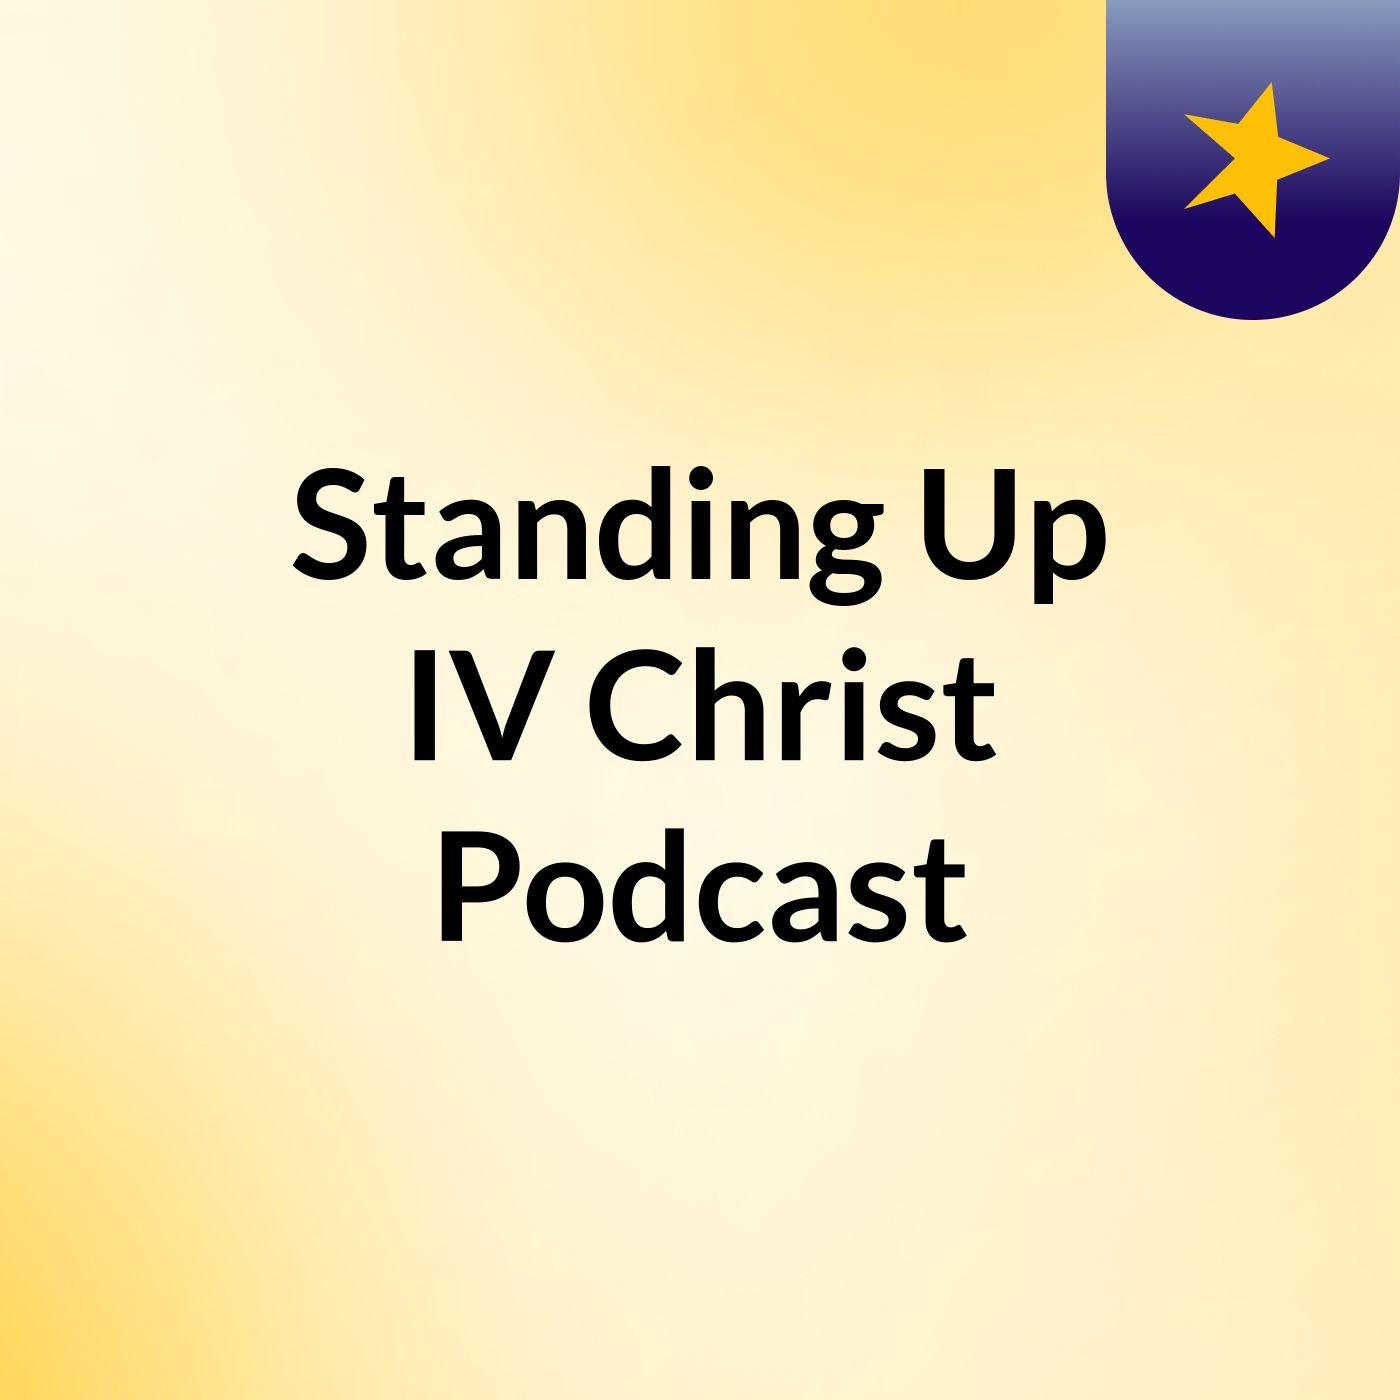 Standing Up IV Christ Podcast